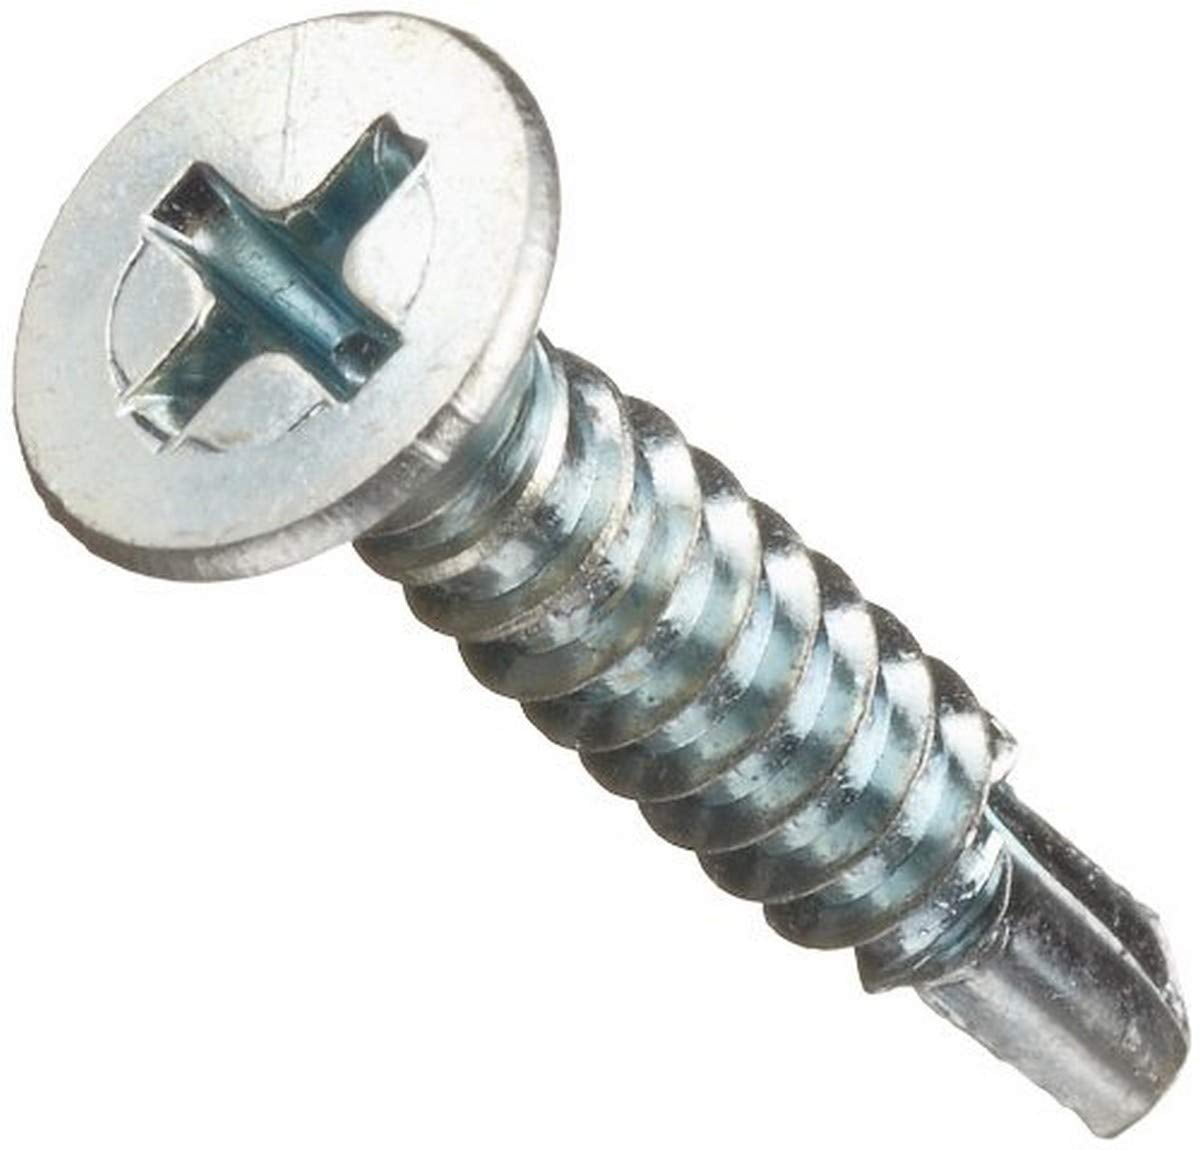 Phillips Drive 82 Degree Flat Head Steel Thread Cutting Screw 3/4 Length #4-40 Thread Size Zinc Plated Pack of 100 Type F